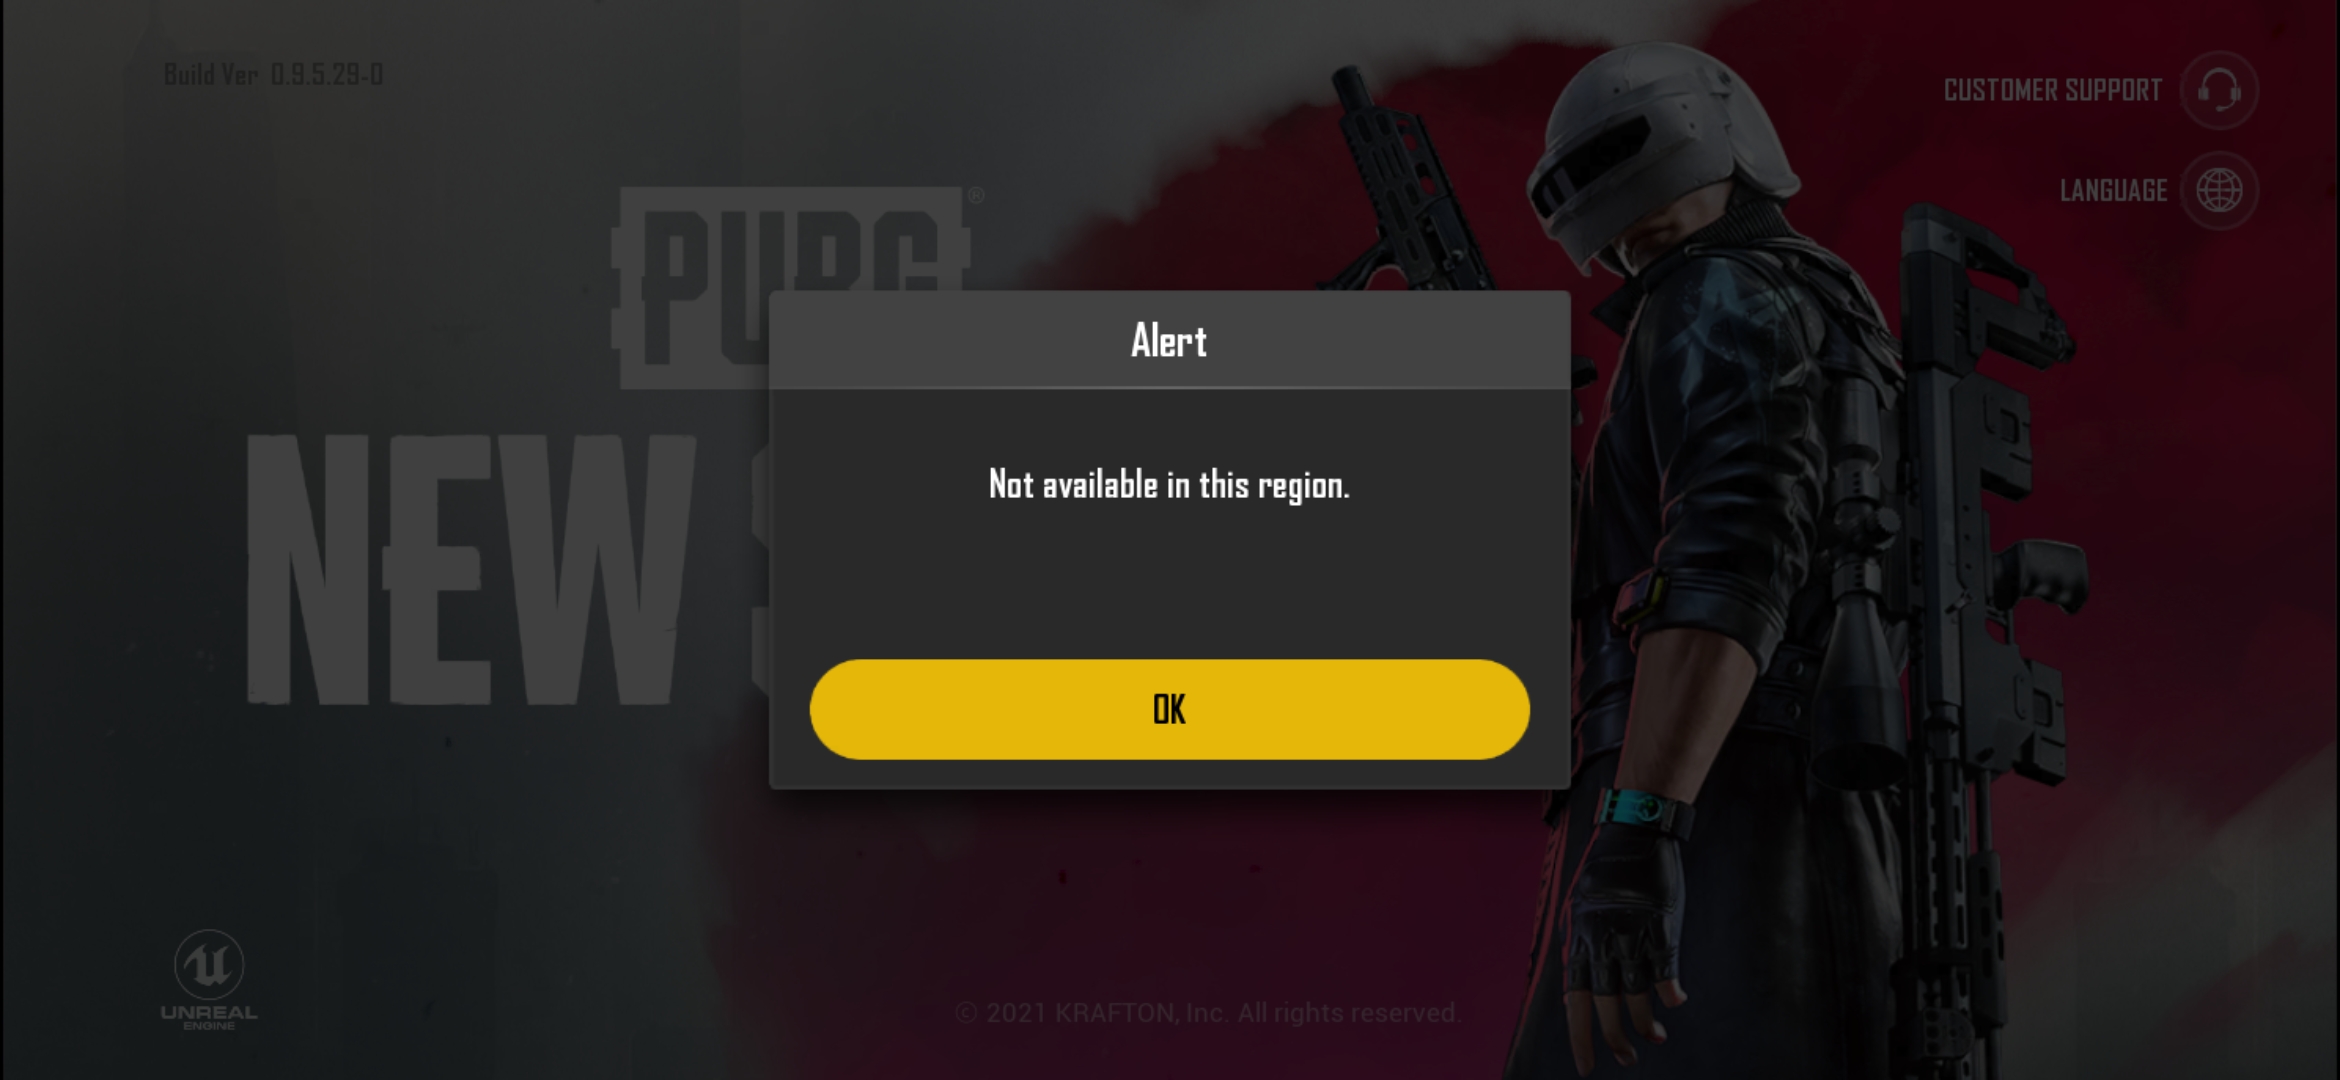 Download PUBG New State APK and OBB - Alpha Test Files: Live on Play Store